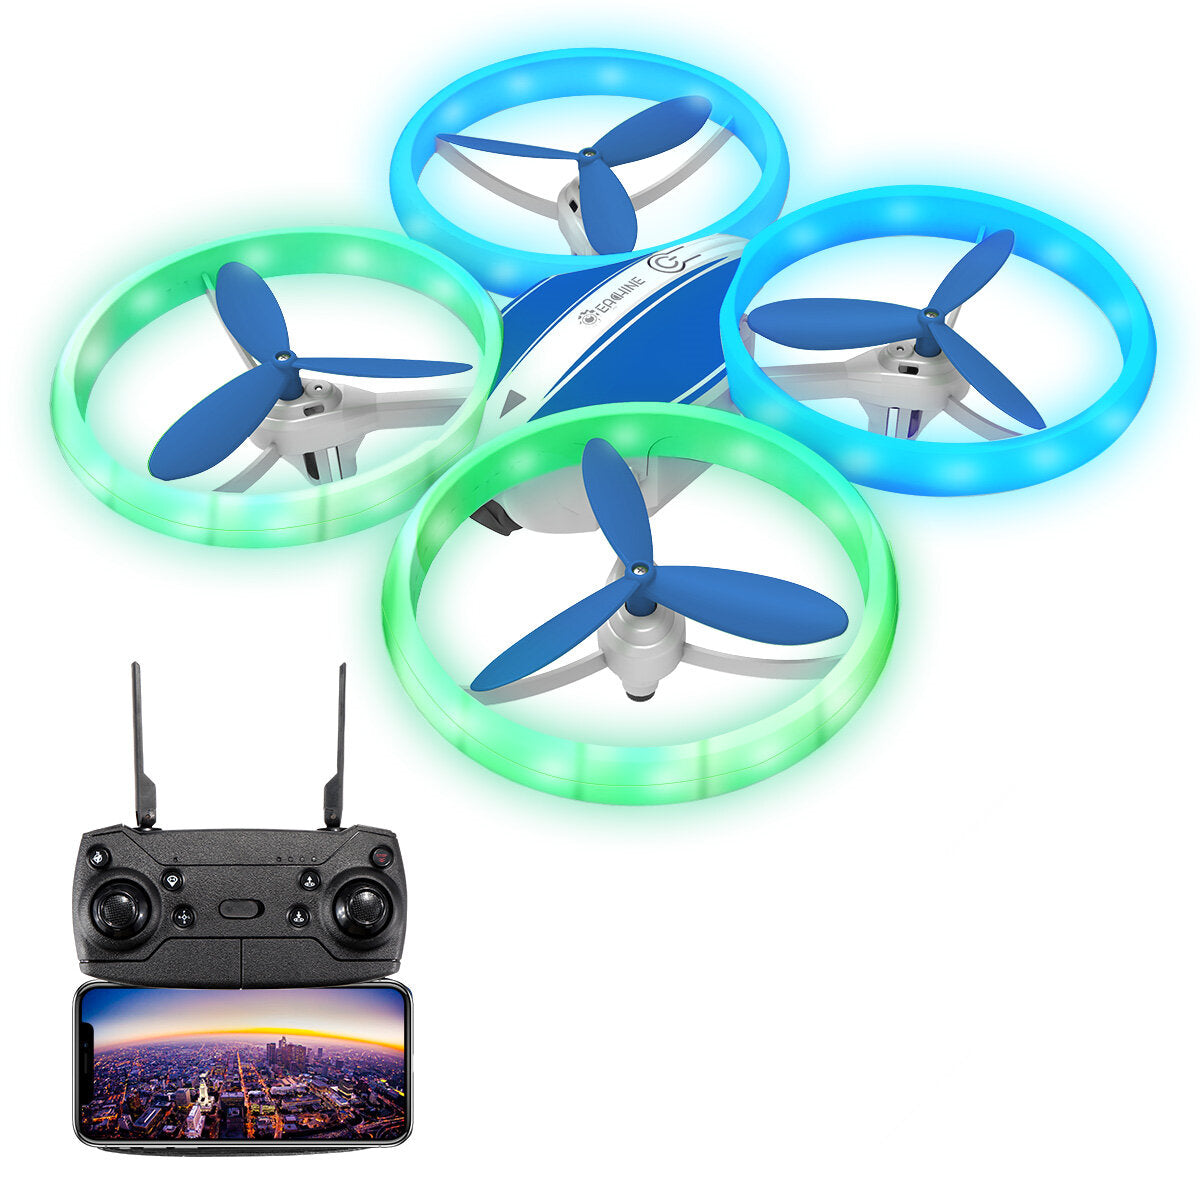 WIFI FPV With 1080P HD Camera Altitude Hold Headless Mode RC Drone Quadcopter